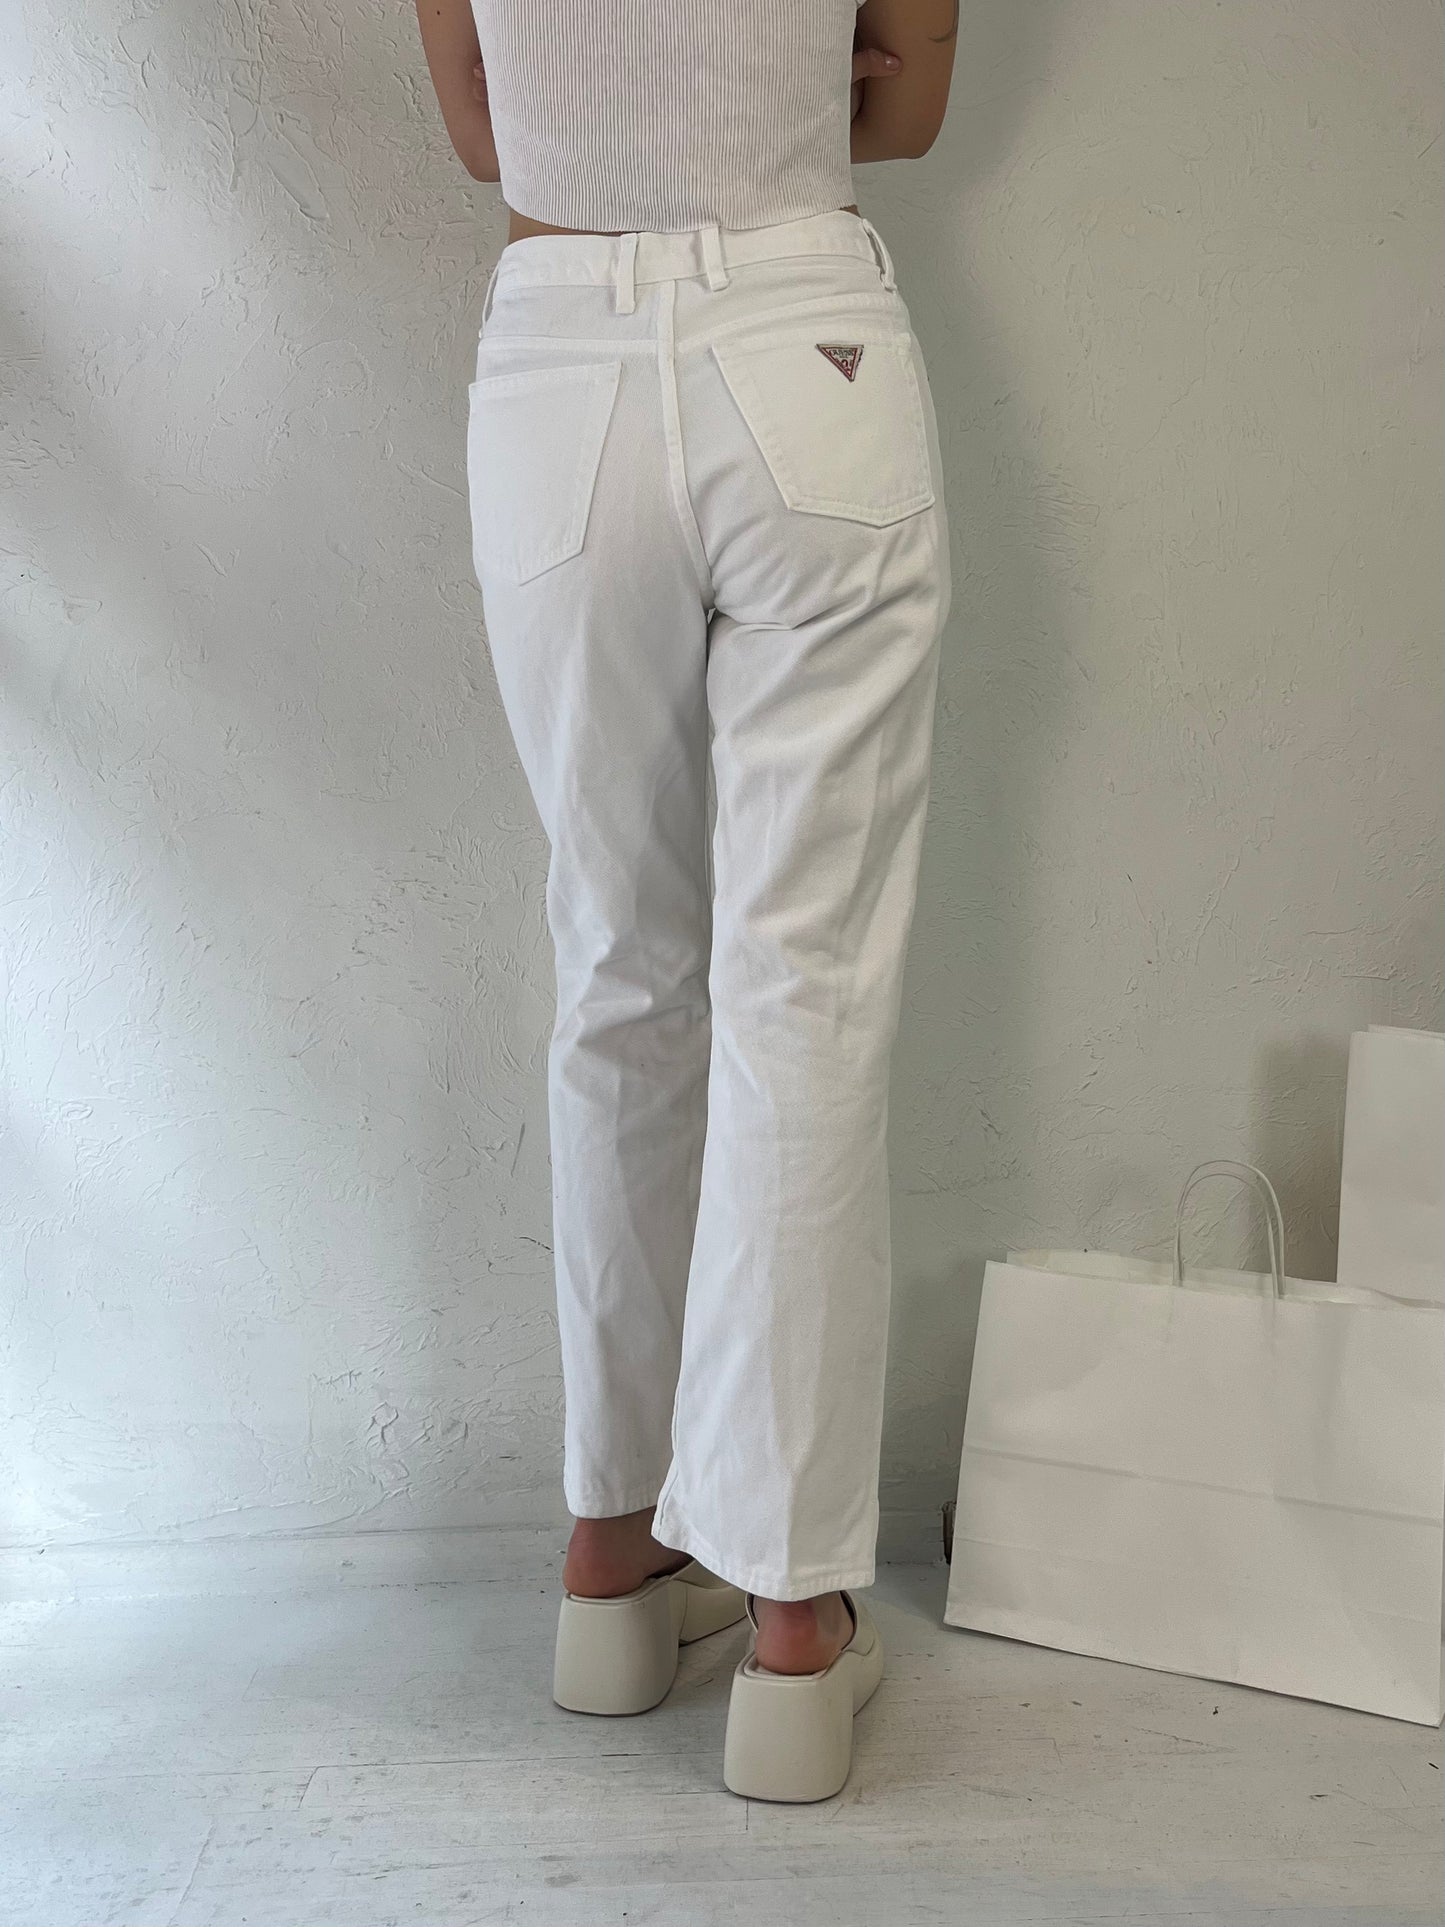 90s 'Guess' White Tapered Jeans / Made in Canada / 28